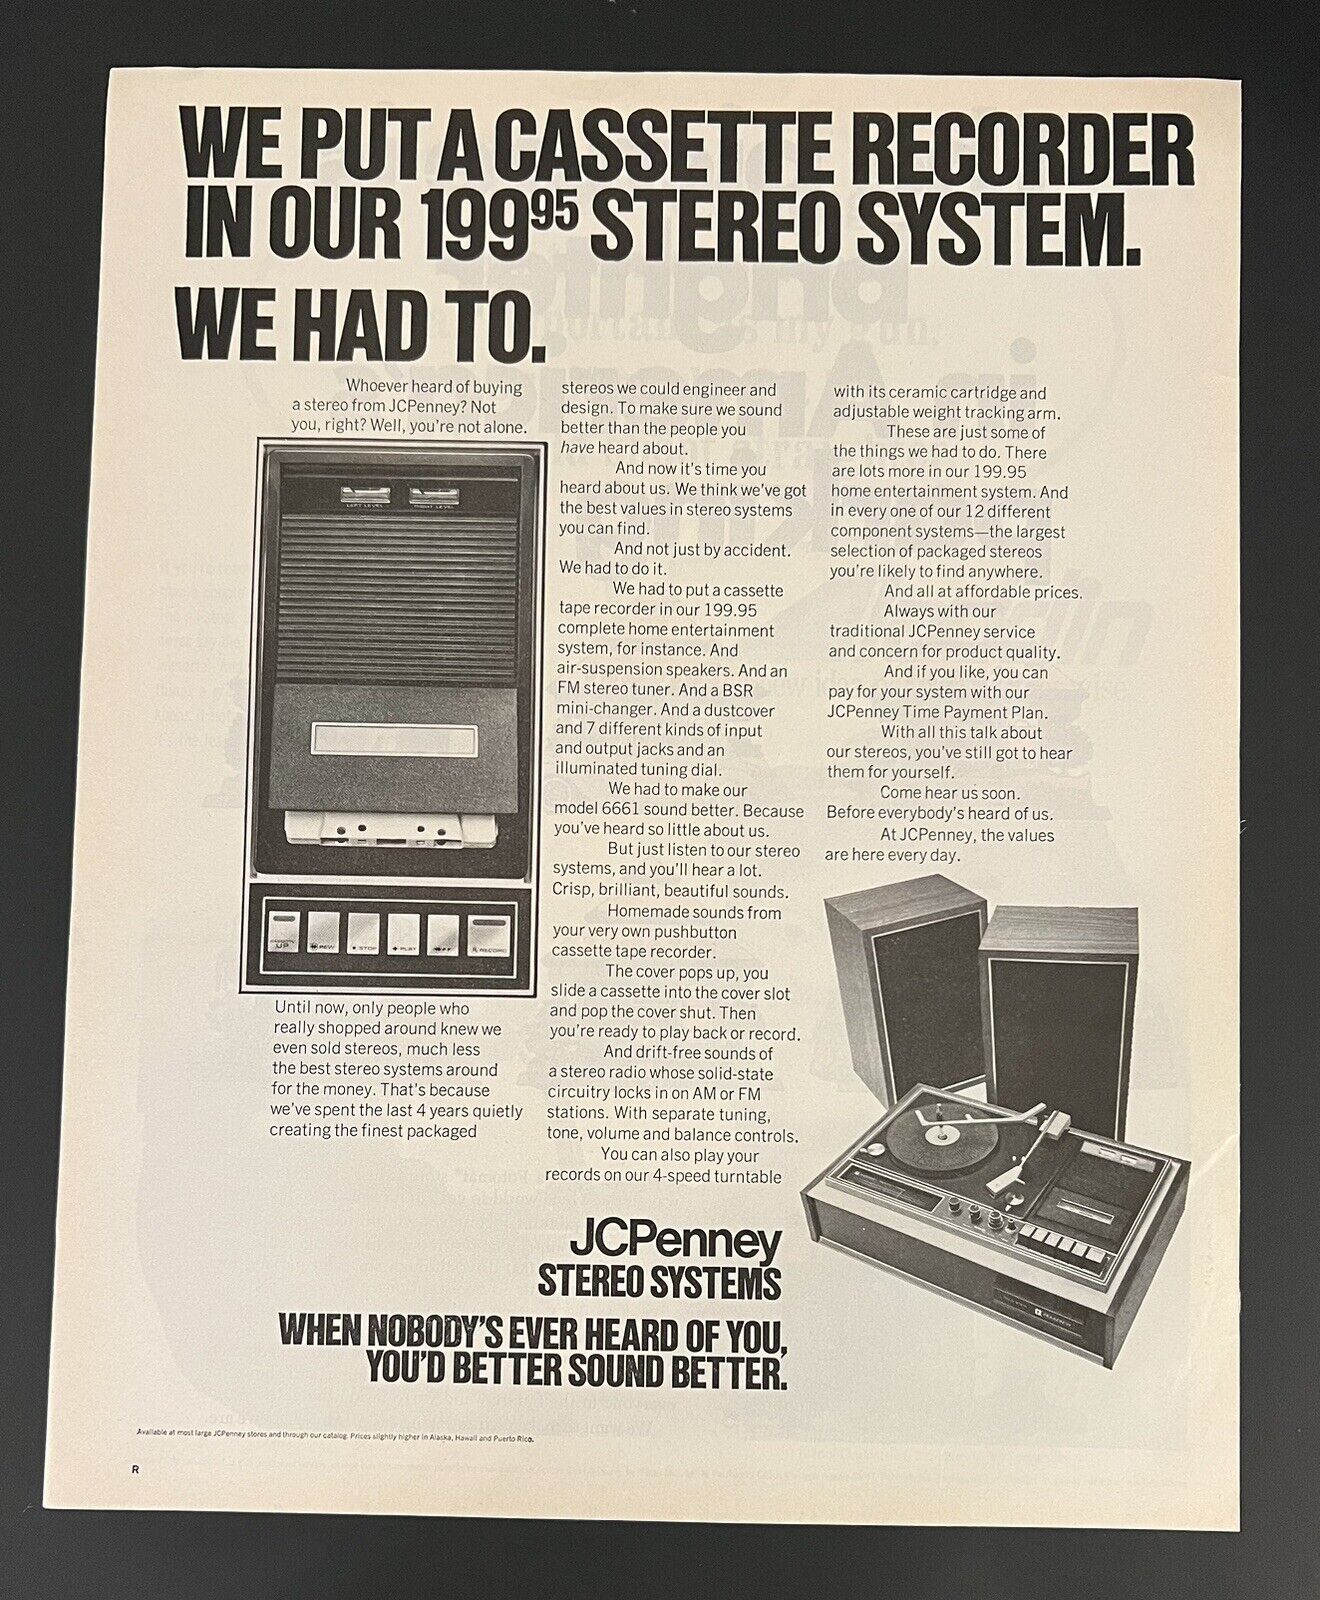 JC Penney Stereo Systems 1971 Life Print Add 13x11 70s Technology